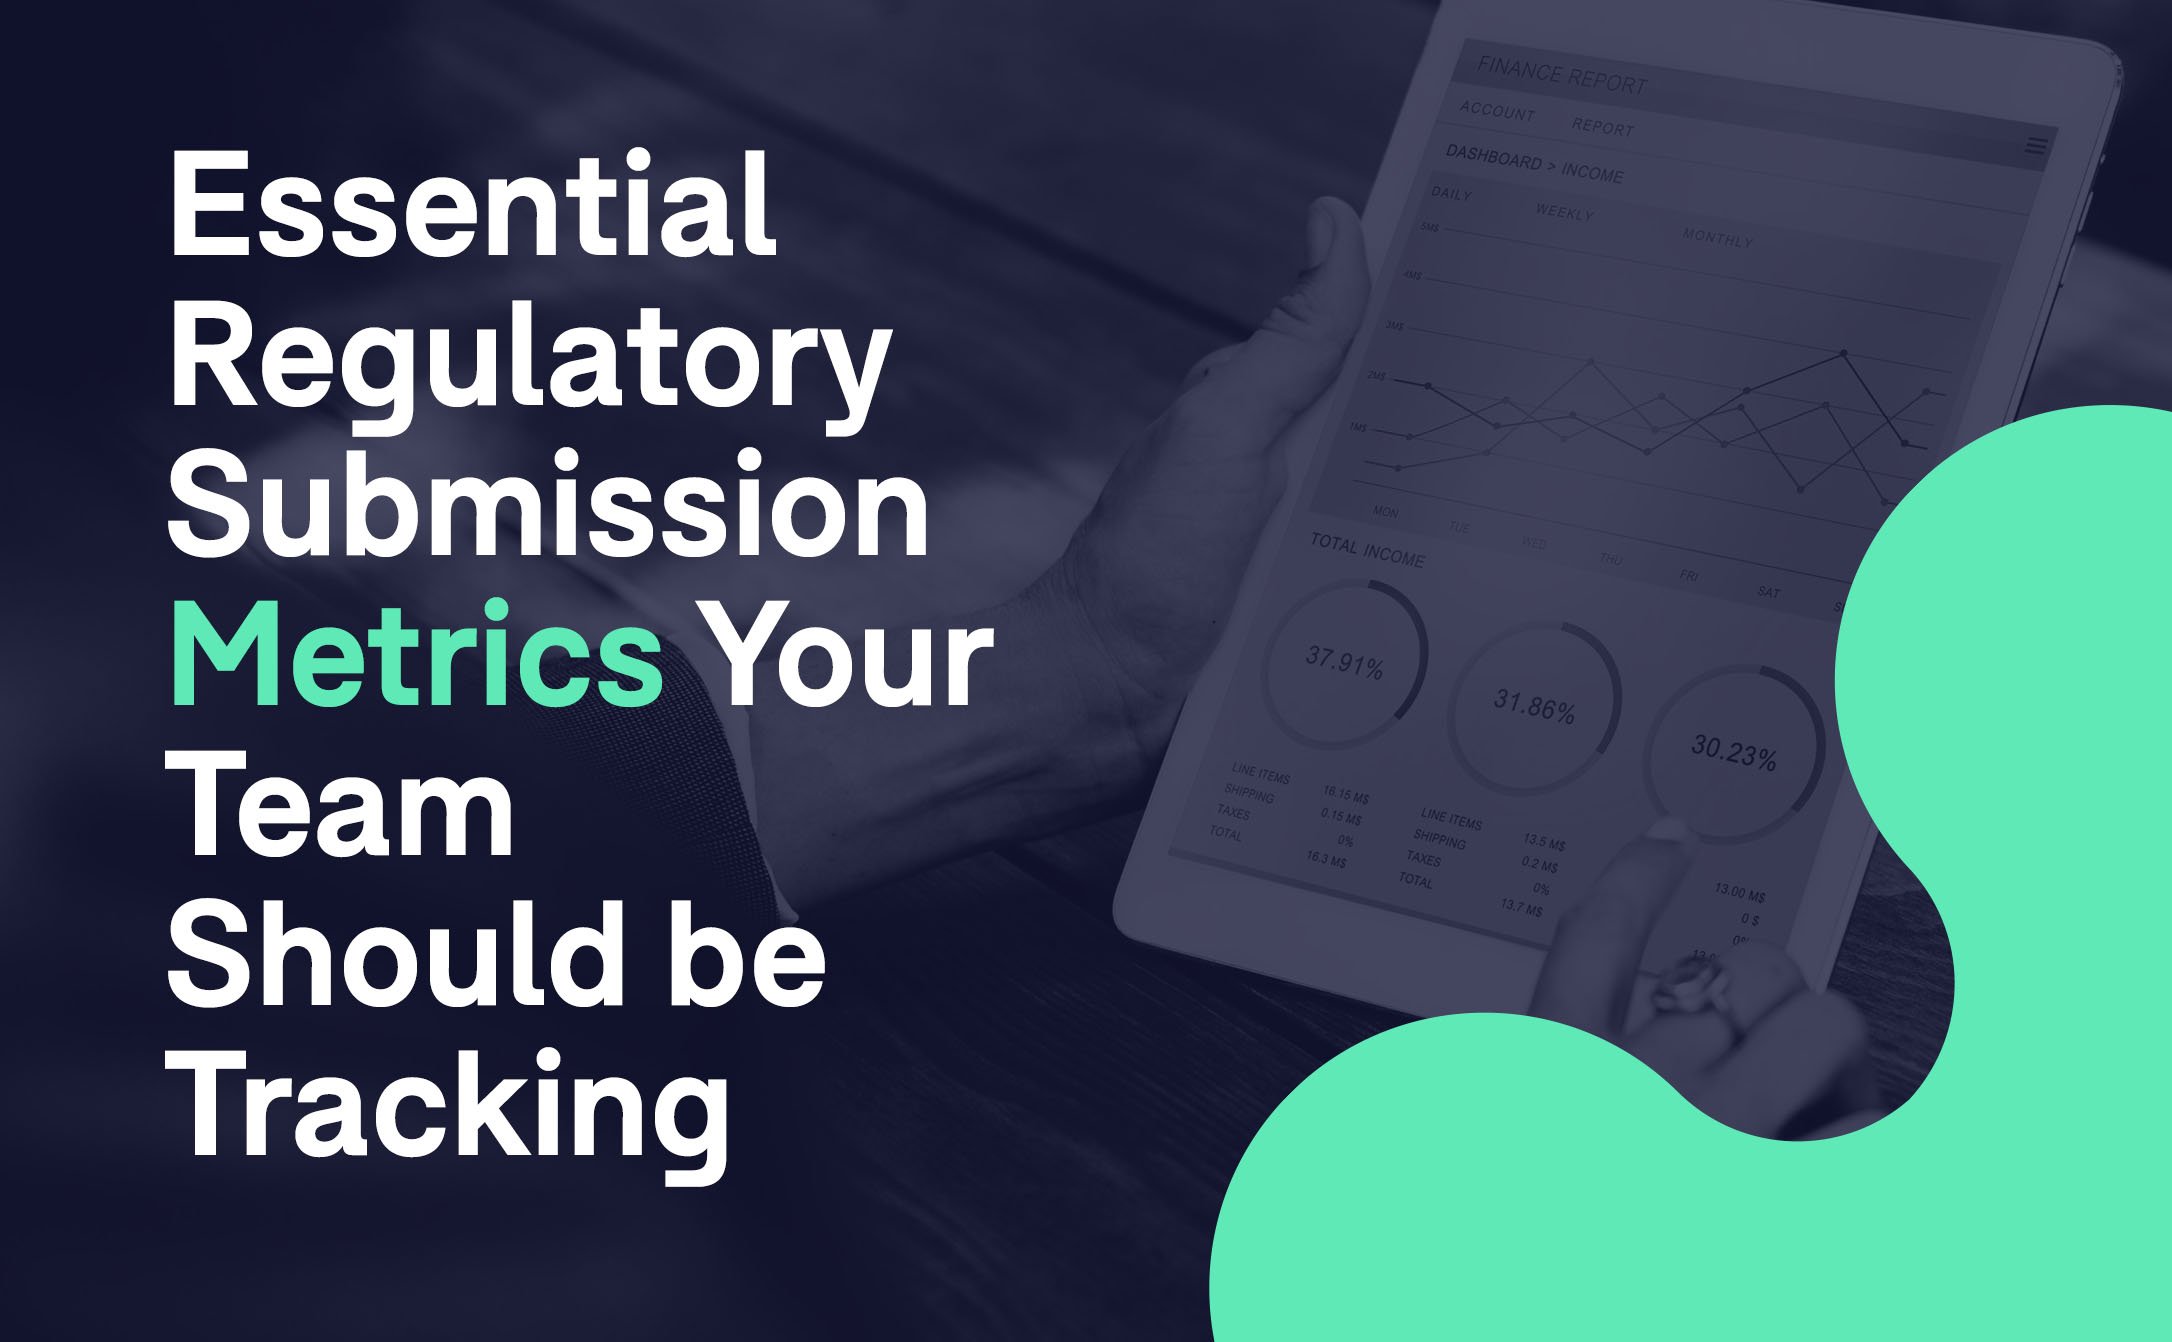 Essential Regulatory Submission Metrics Your Team Should be Tracking